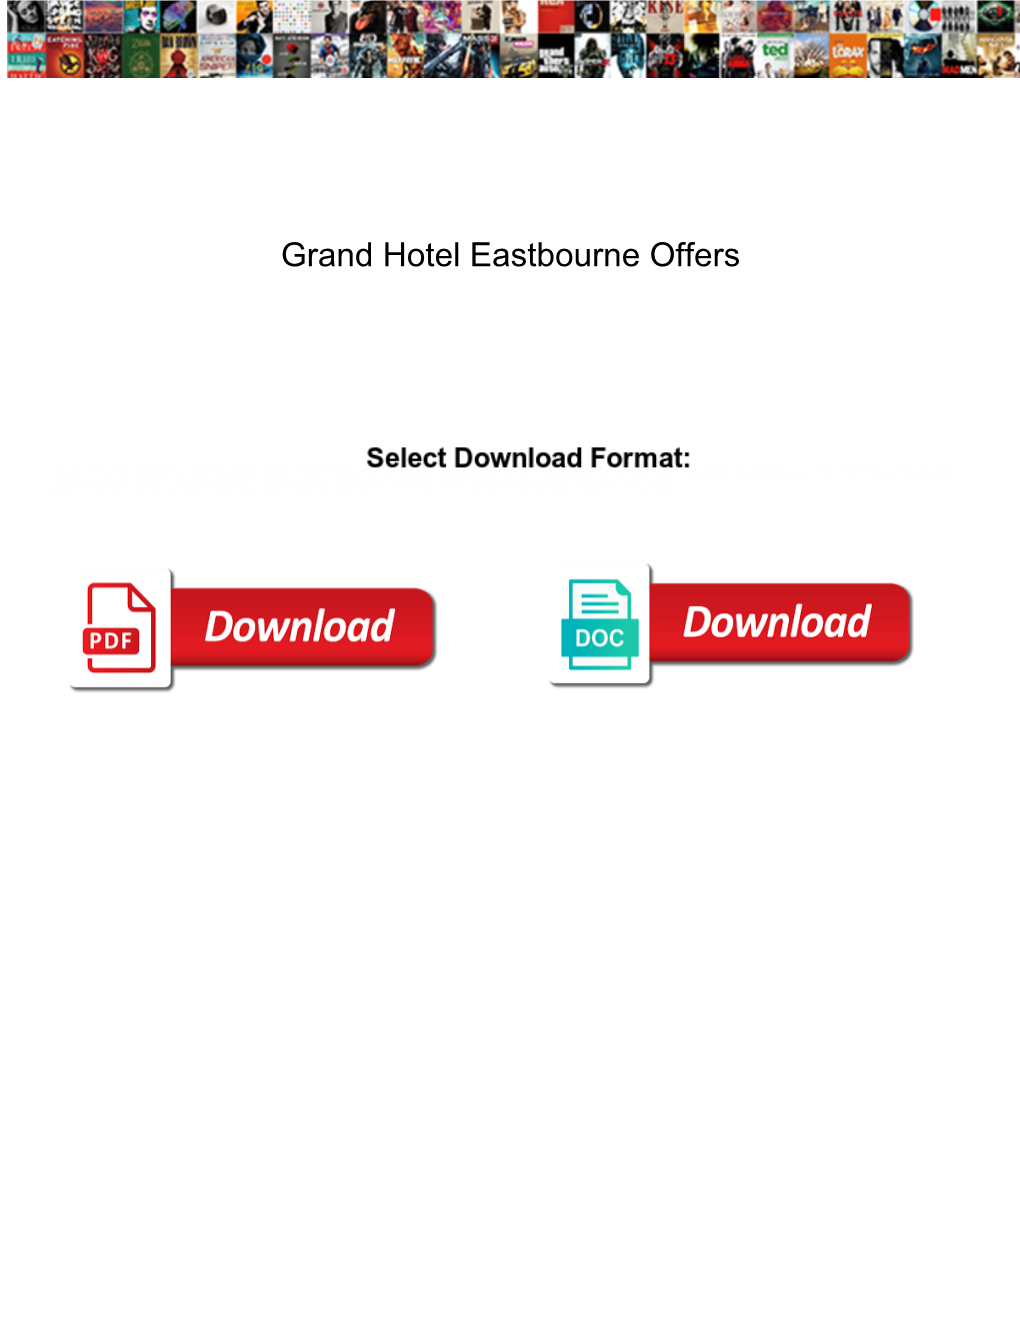 Grand Hotel Eastbourne Offers